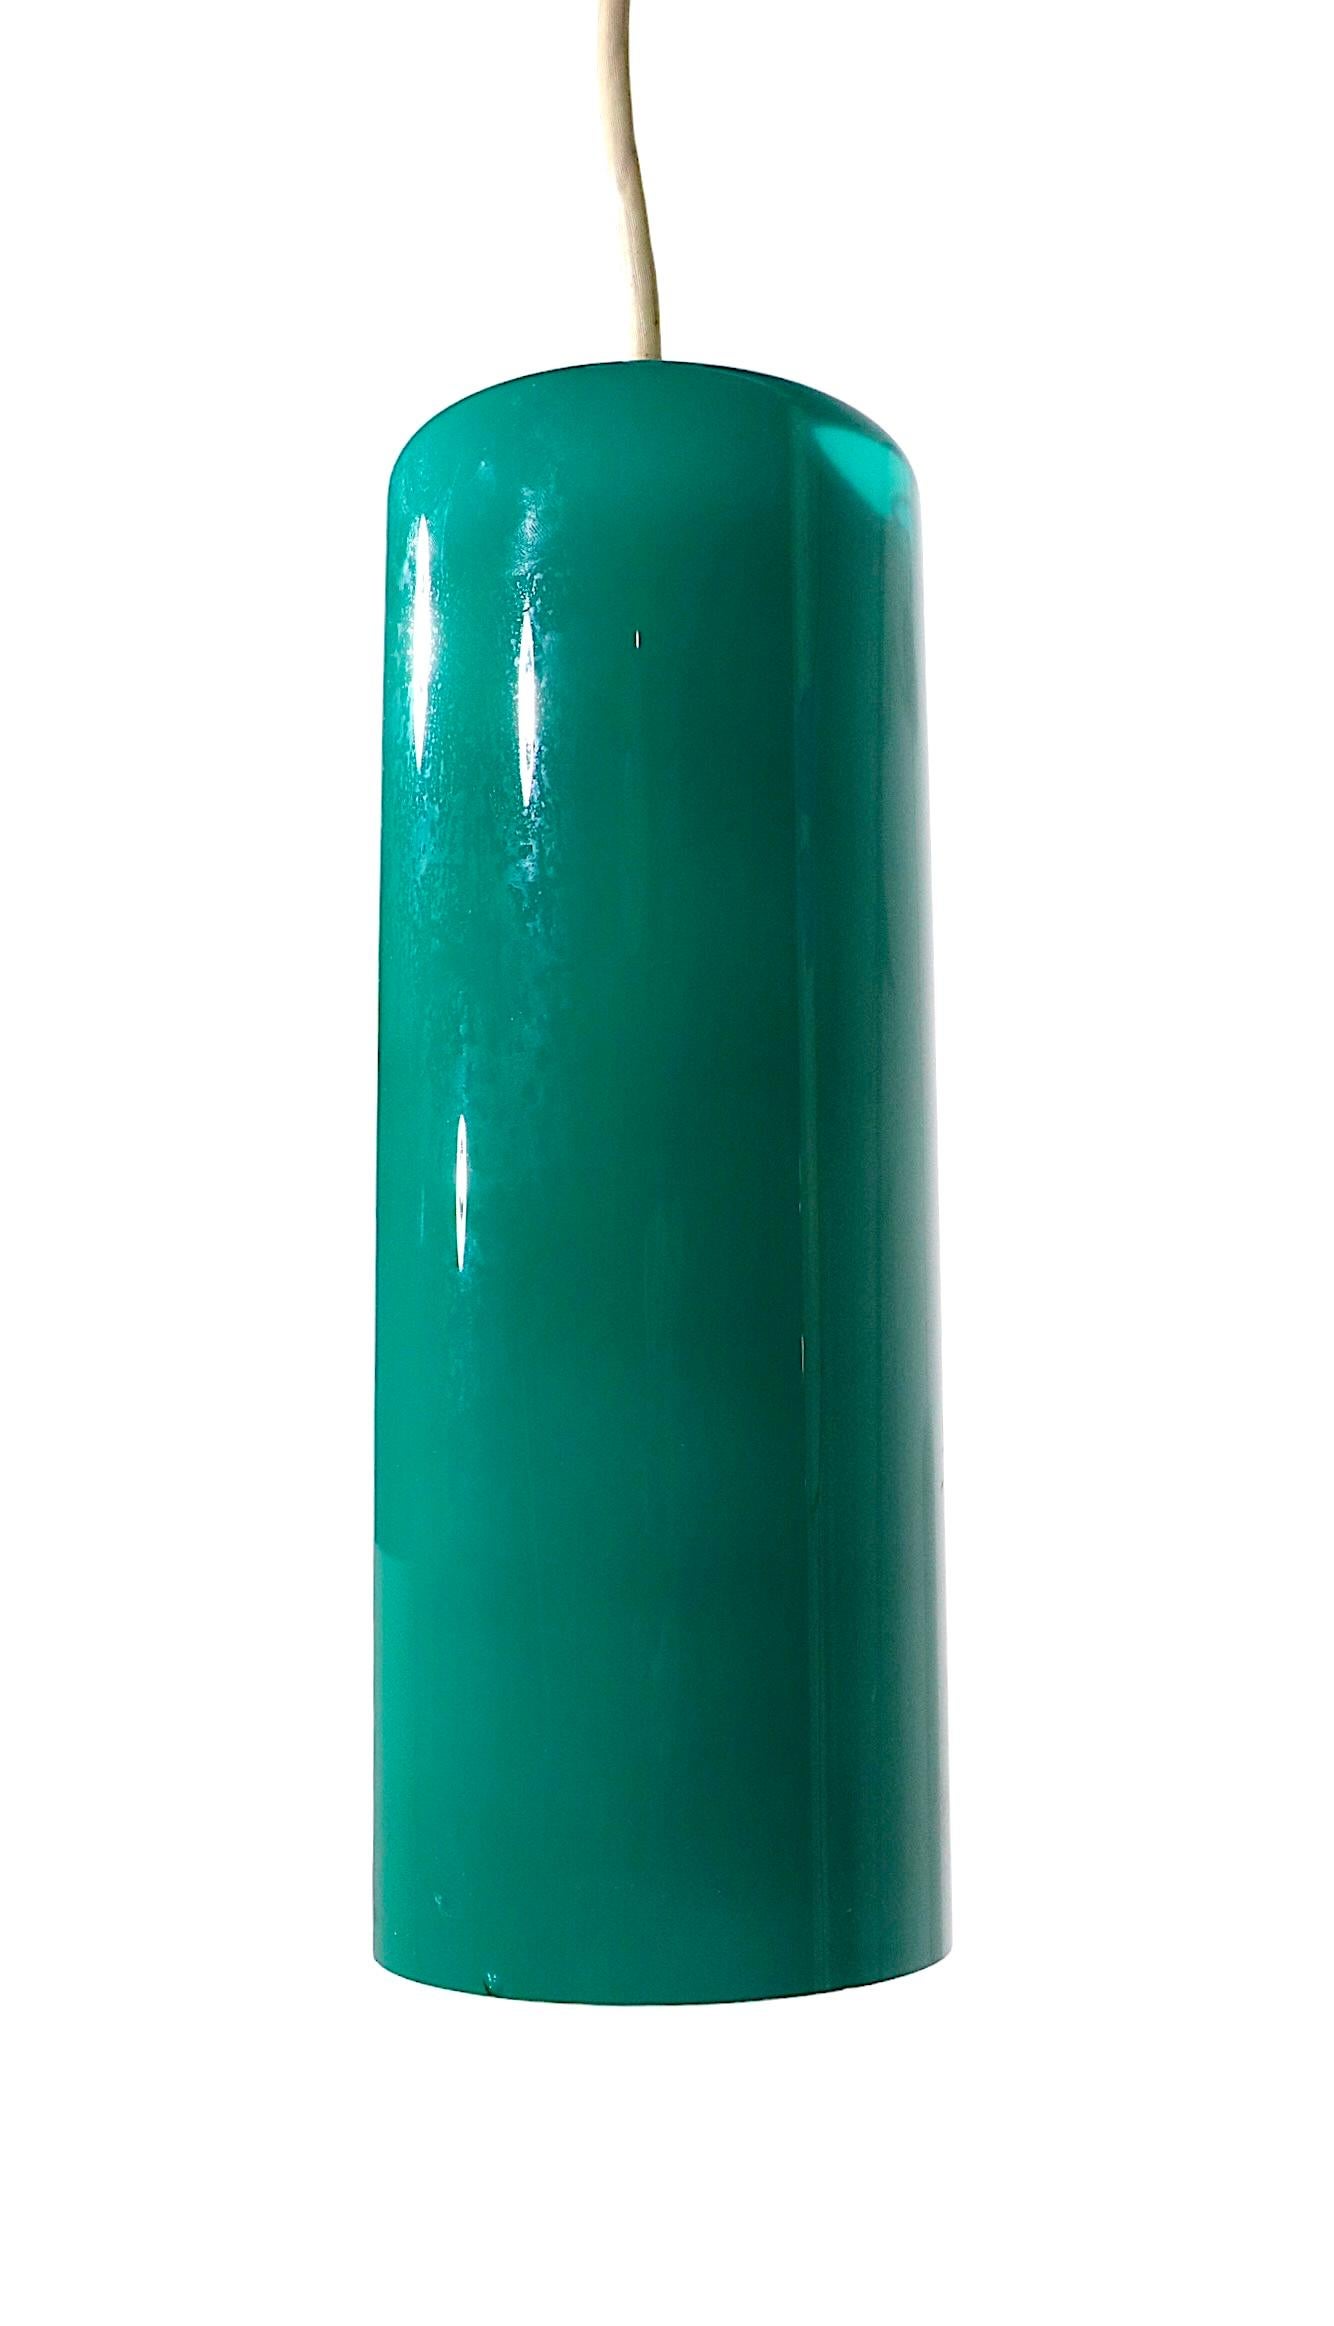 Prescolite Cylinder Pendant Chandelier in Green Glass, C 1950 - 1970's In Good Condition For Sale In New York, NY